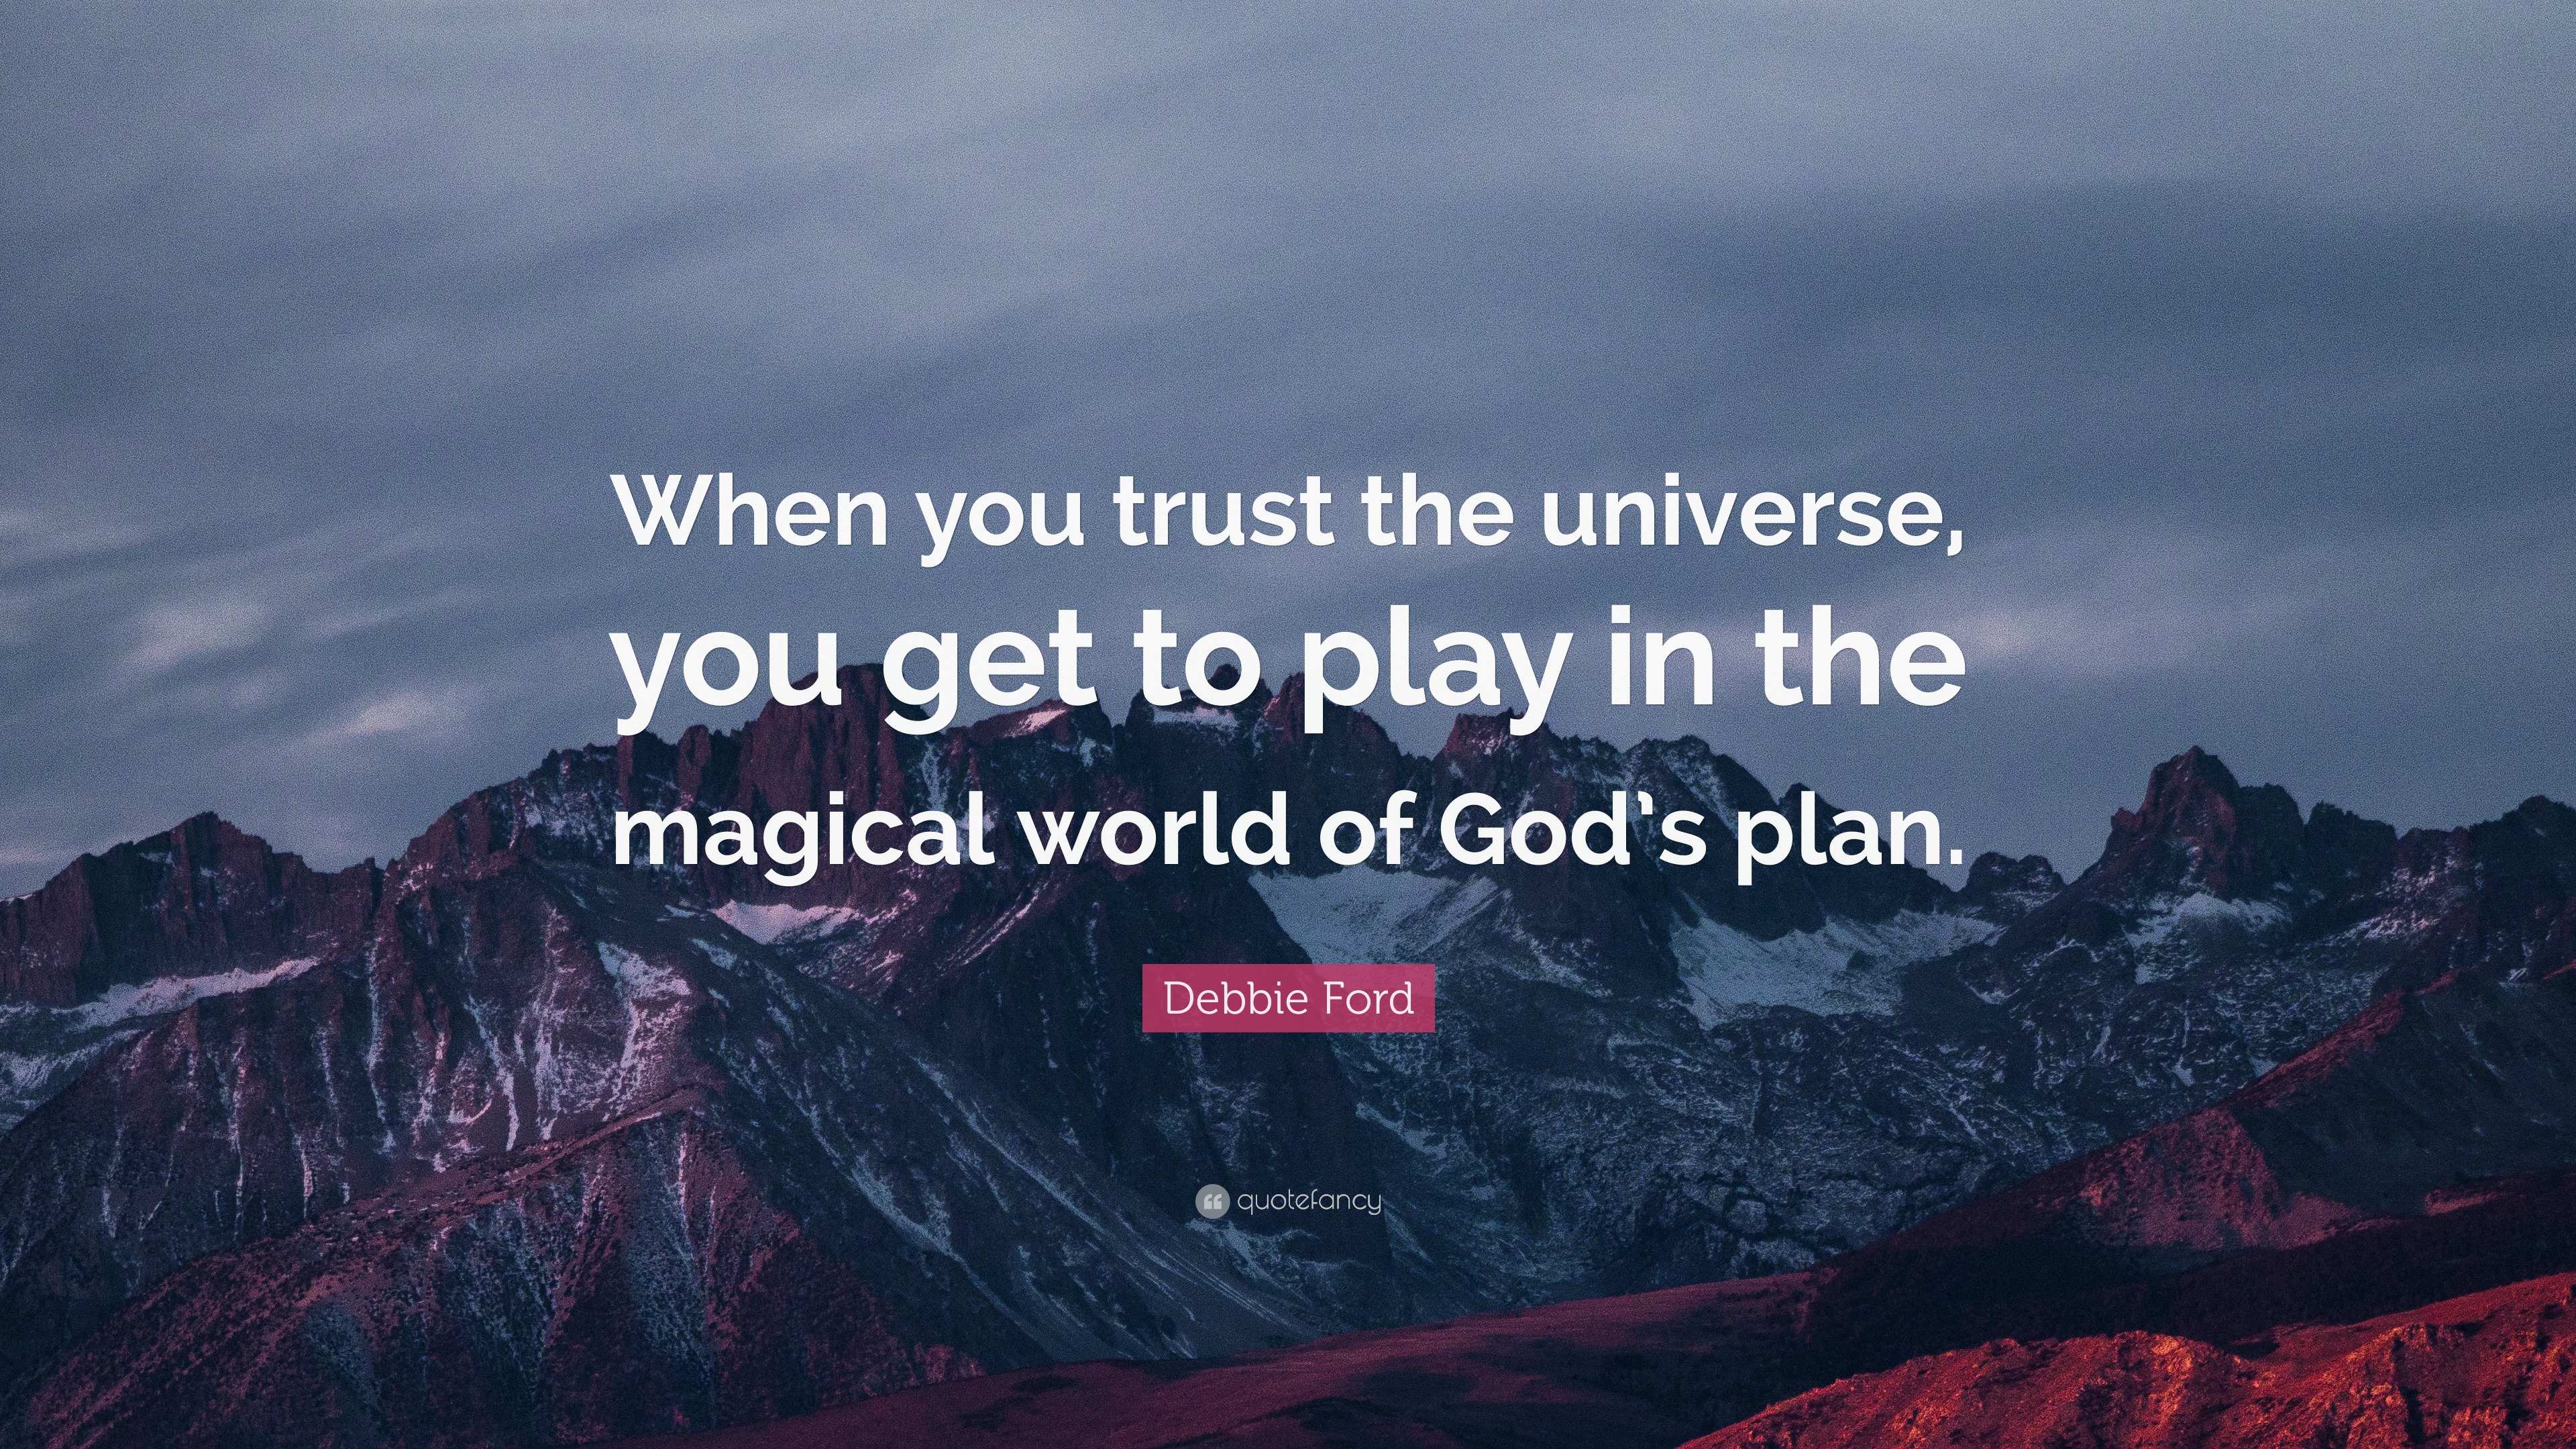 Debbie Ford Quote: “When you trust the universe, you get to play in the  magical world